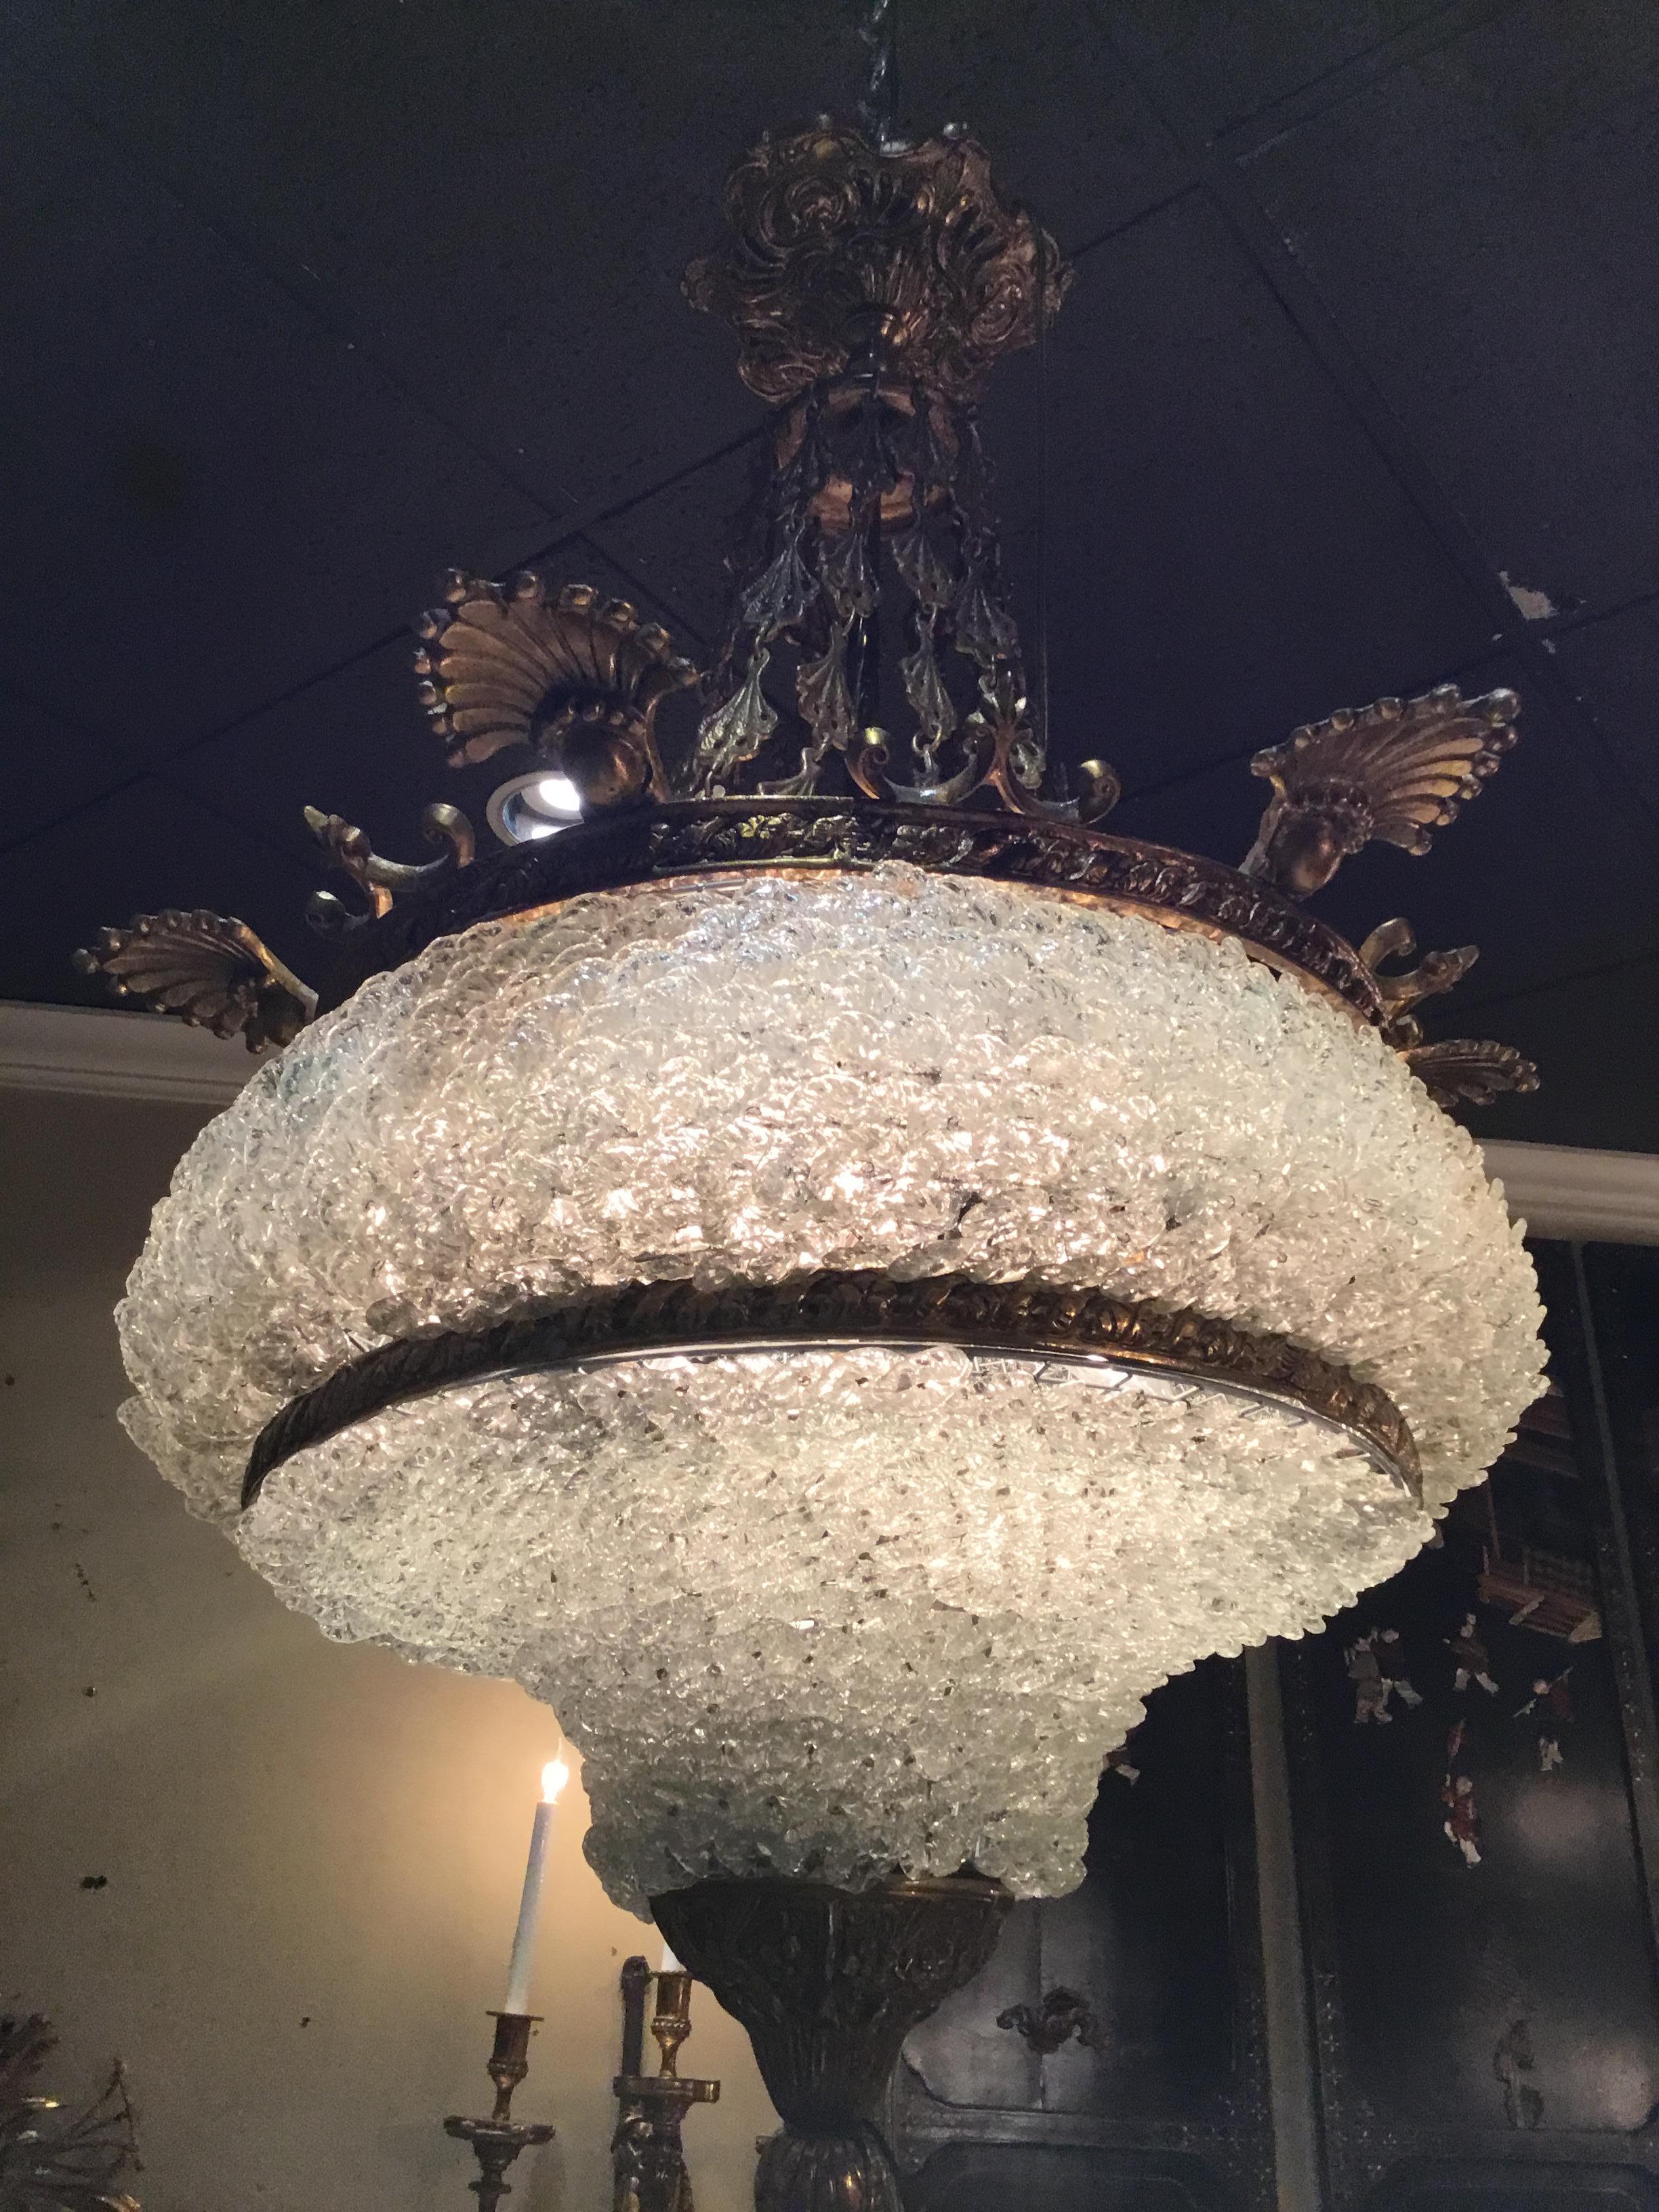 A bowl shaped fixture made up of a multitude of Venetian crystal pieces
That surround the fixture holding six lights. This combination creates
A beautiful diffused light. It is supported by antique bronzed chain.
It ends in a well cast bronze